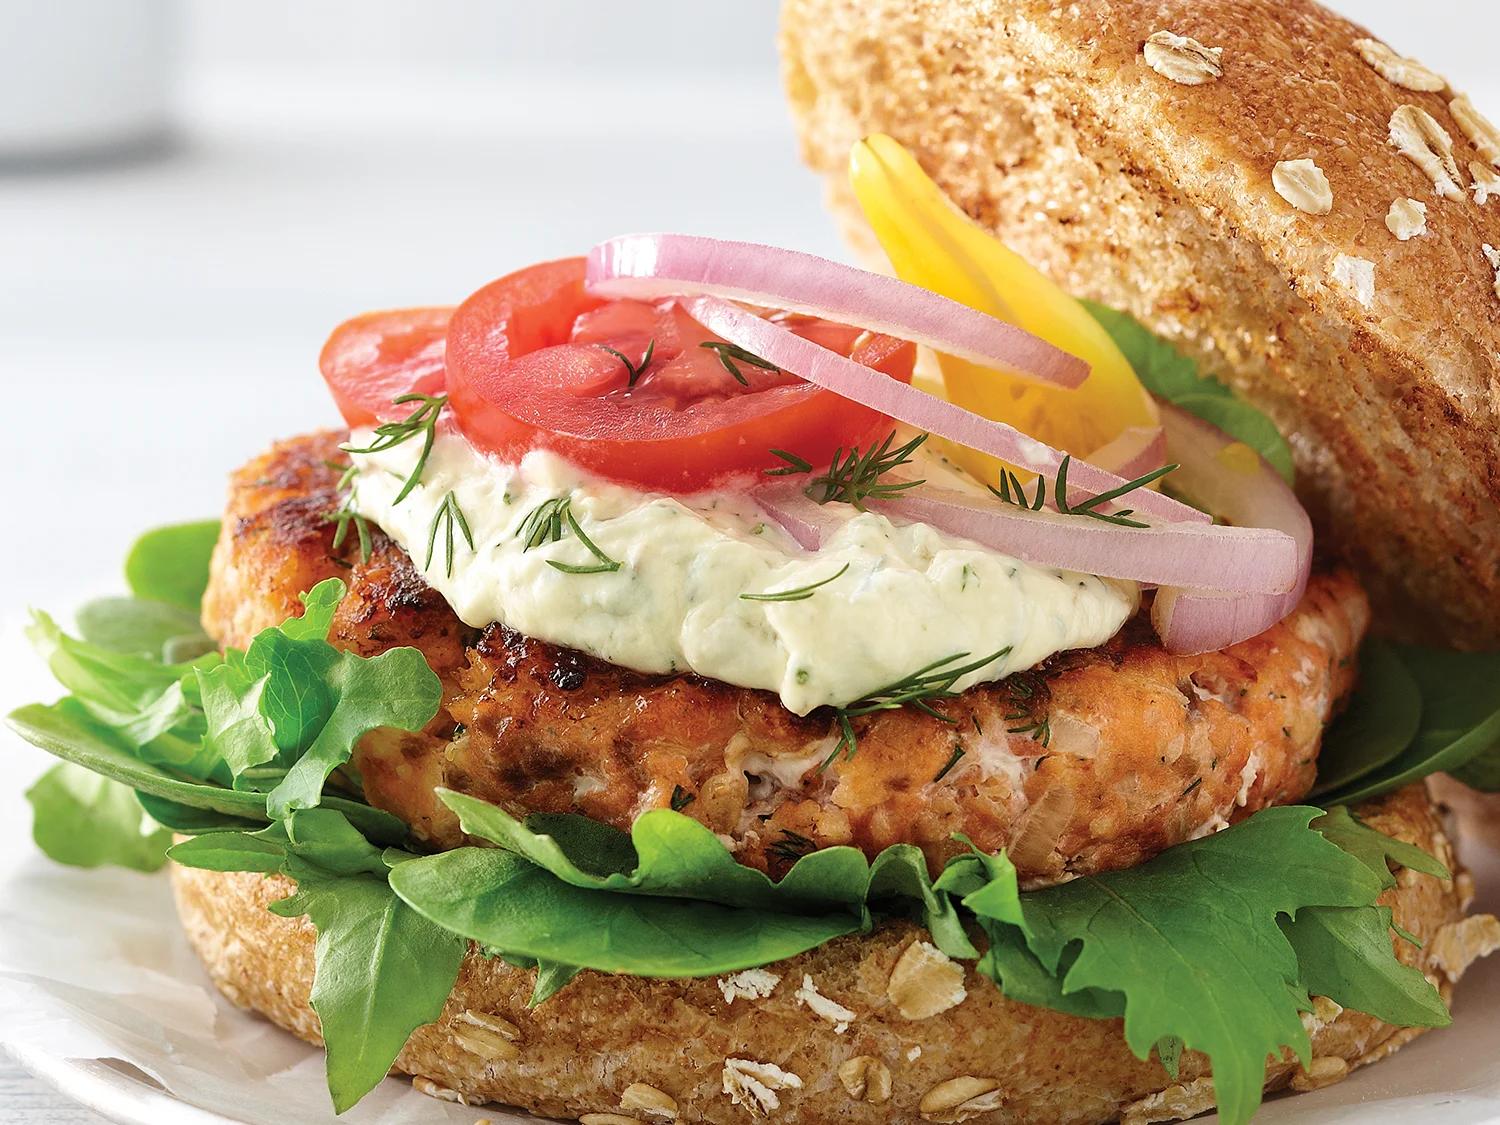 smoked salmon burger - What toppings go on a salmon burger